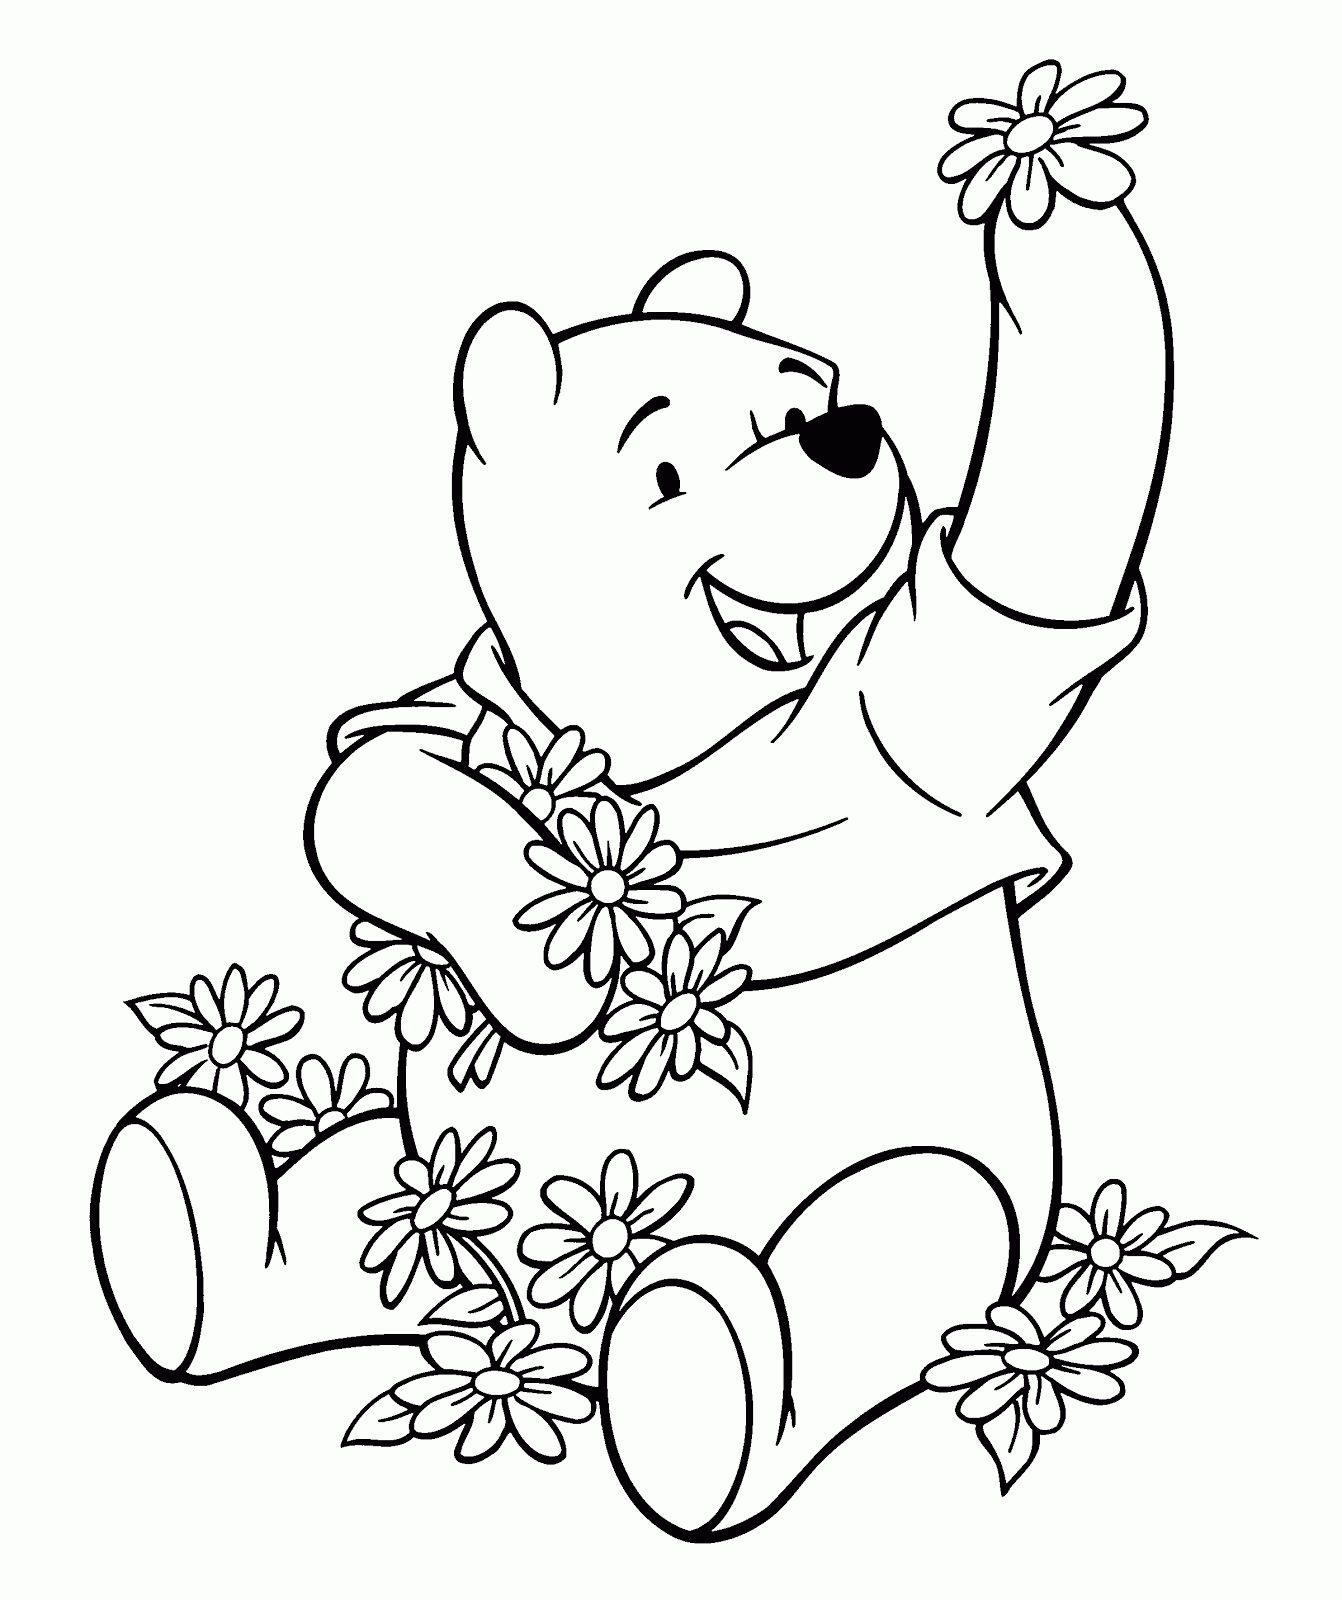 Download Disney Animal Winnie The Pooh Characters Coloring Pages